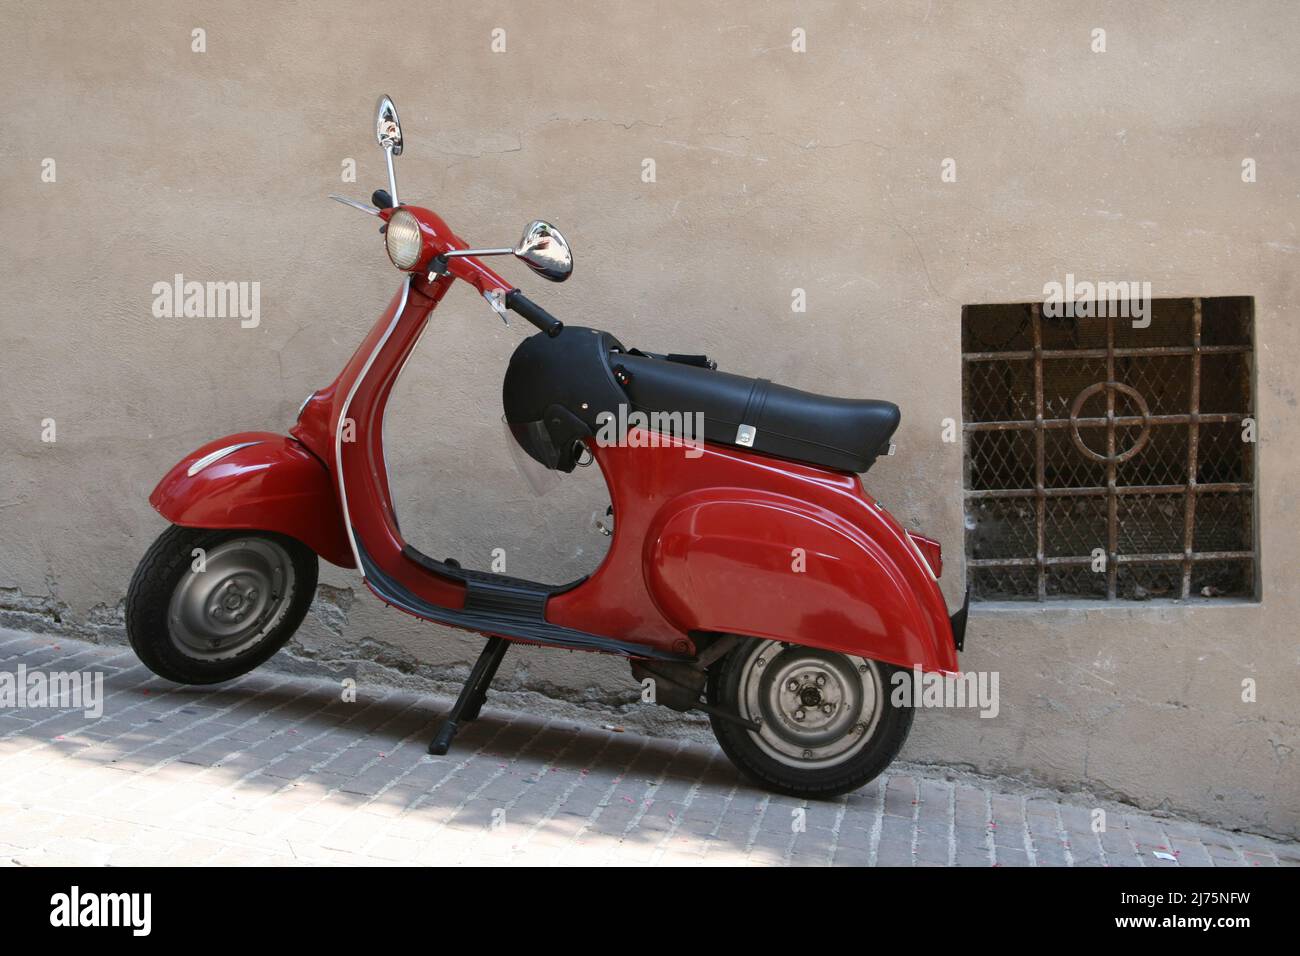 Vespa Px 125 Rear Motorbike Italian Brand of Scooter Manufactured by Piaggio  Editorial Stock Photo - Image of motor, ride: 223051018